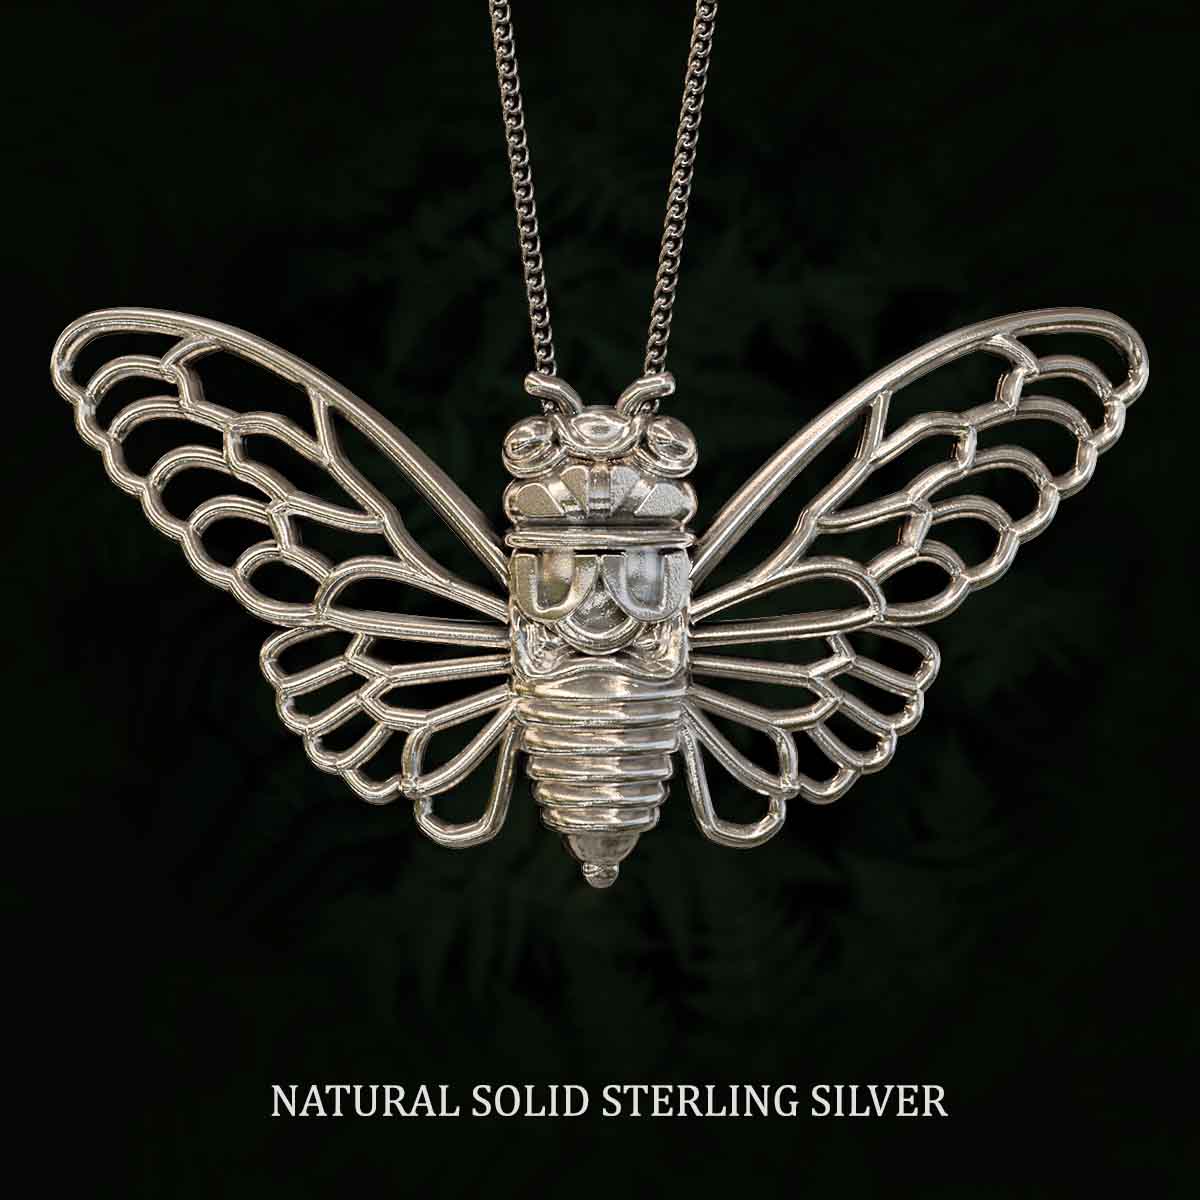     Natural-Satin-Polish-Solid-Sterling-Silver-Cicada-Pendant-Jewelry-For-Necklace